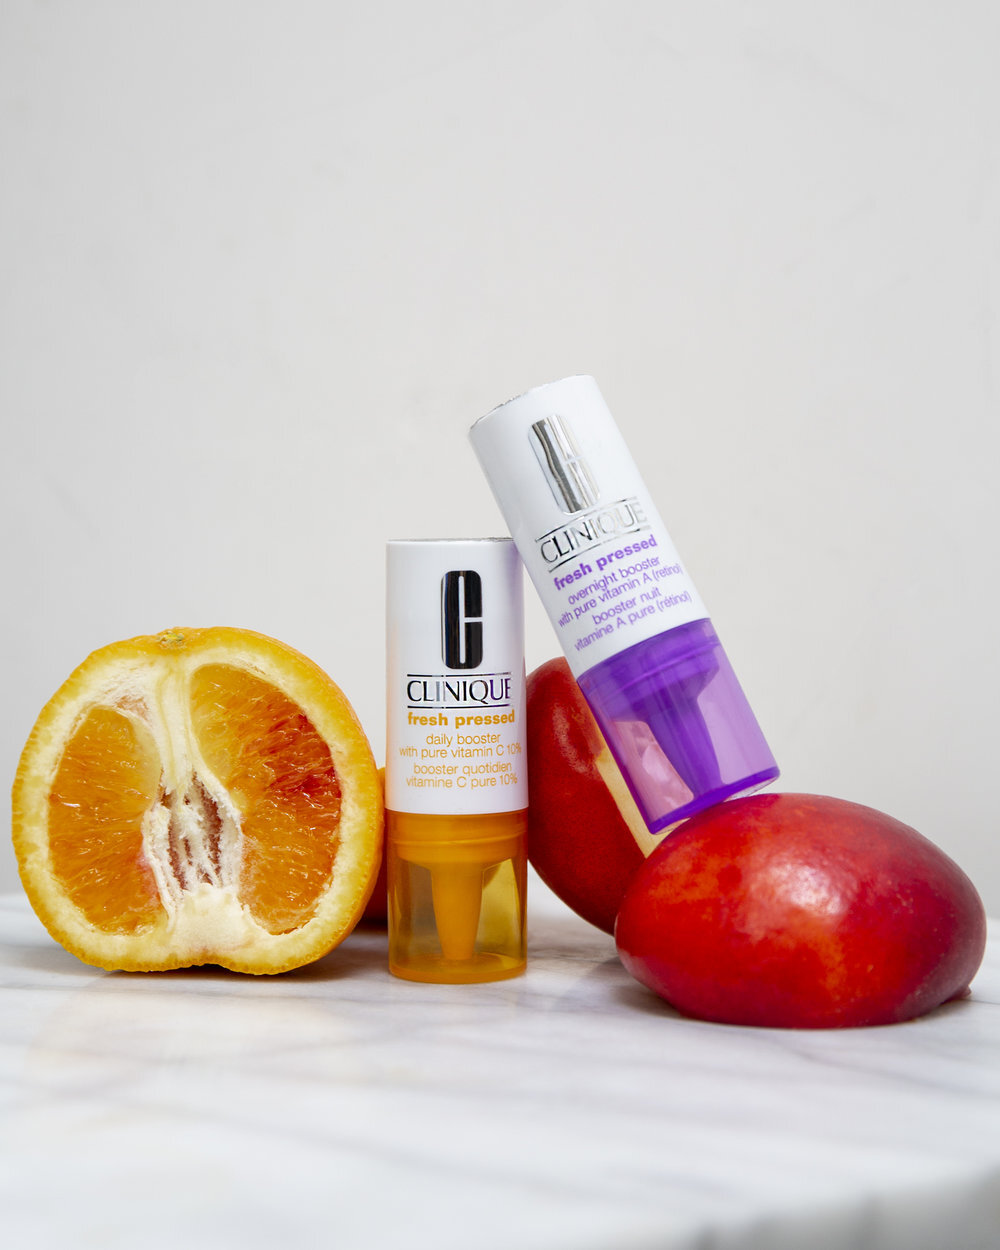 Clinique product photography